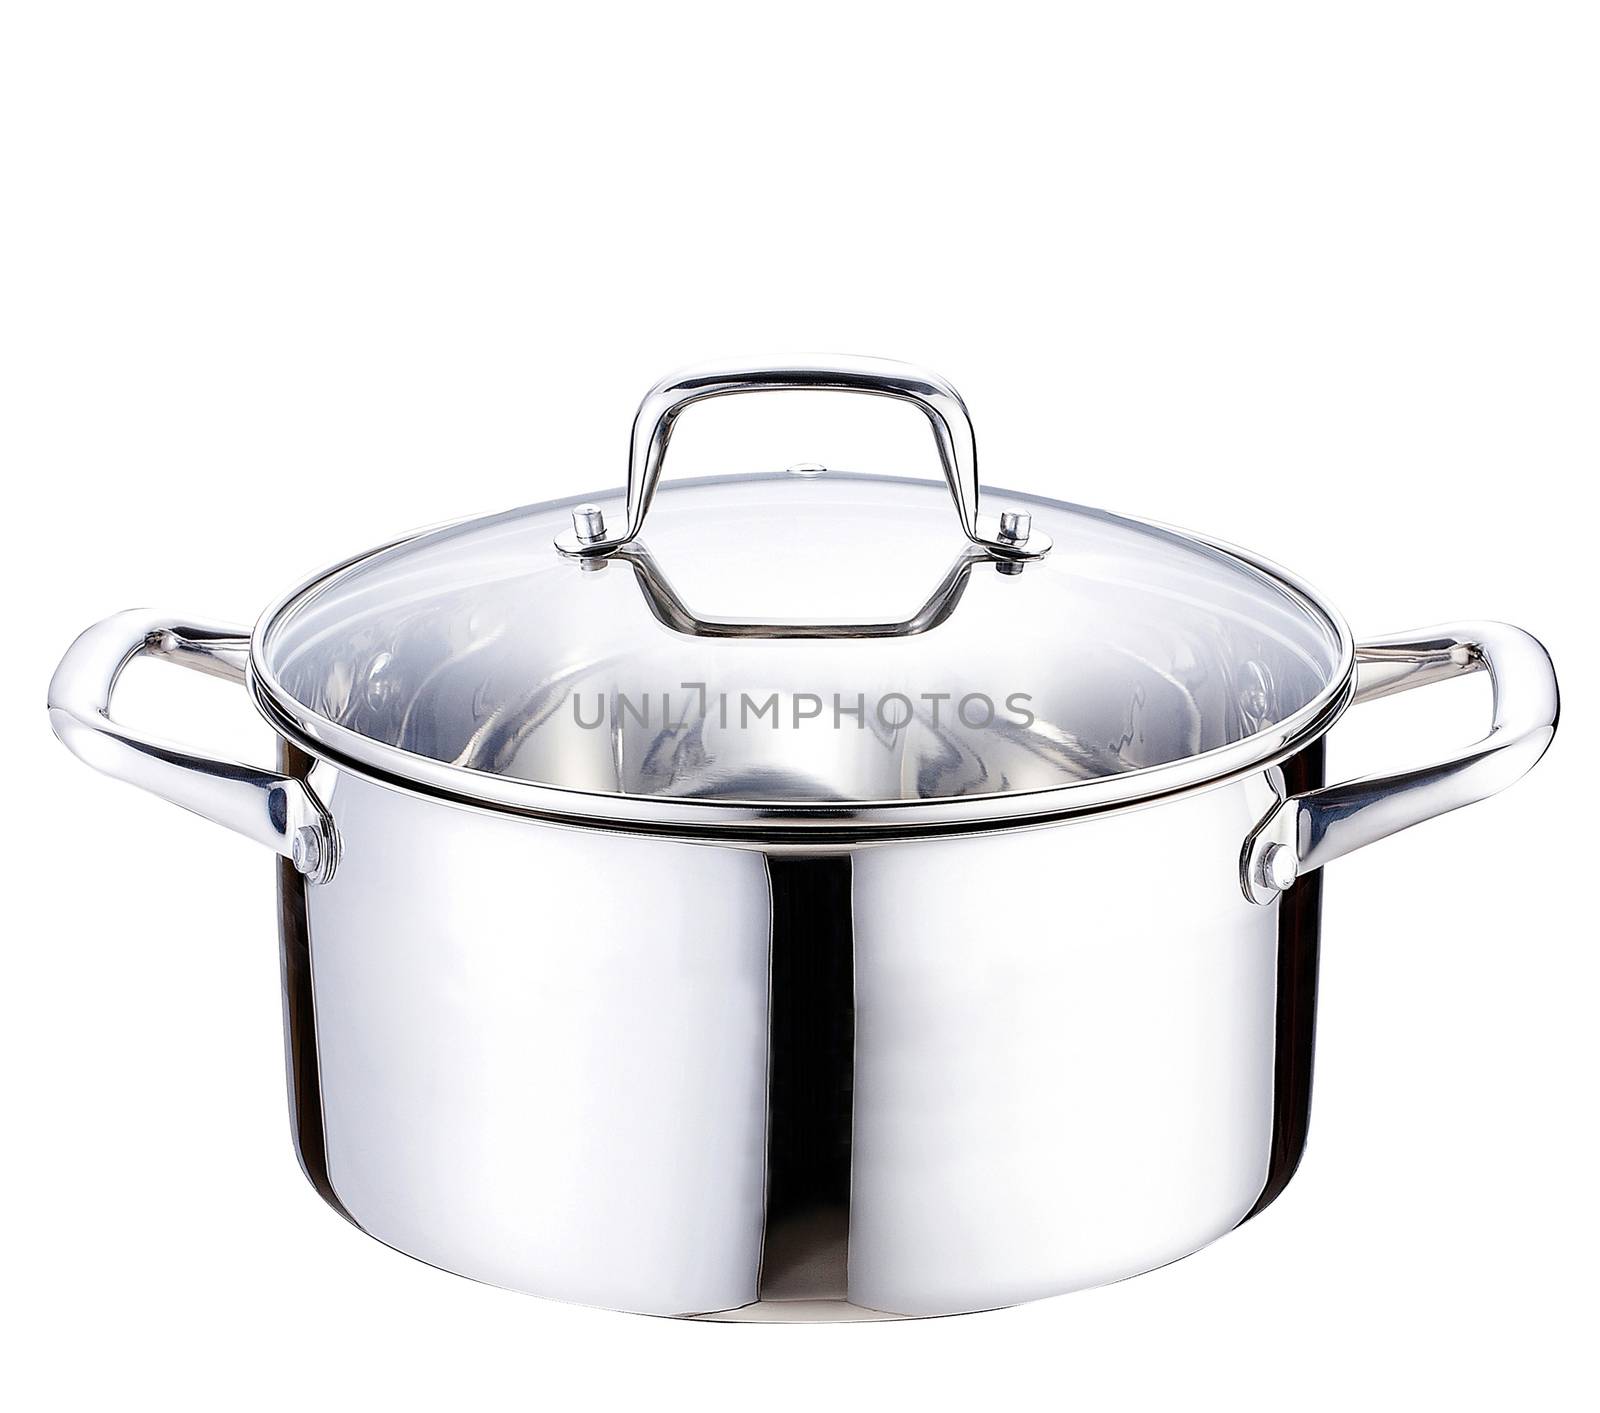 A stainless pan on white background